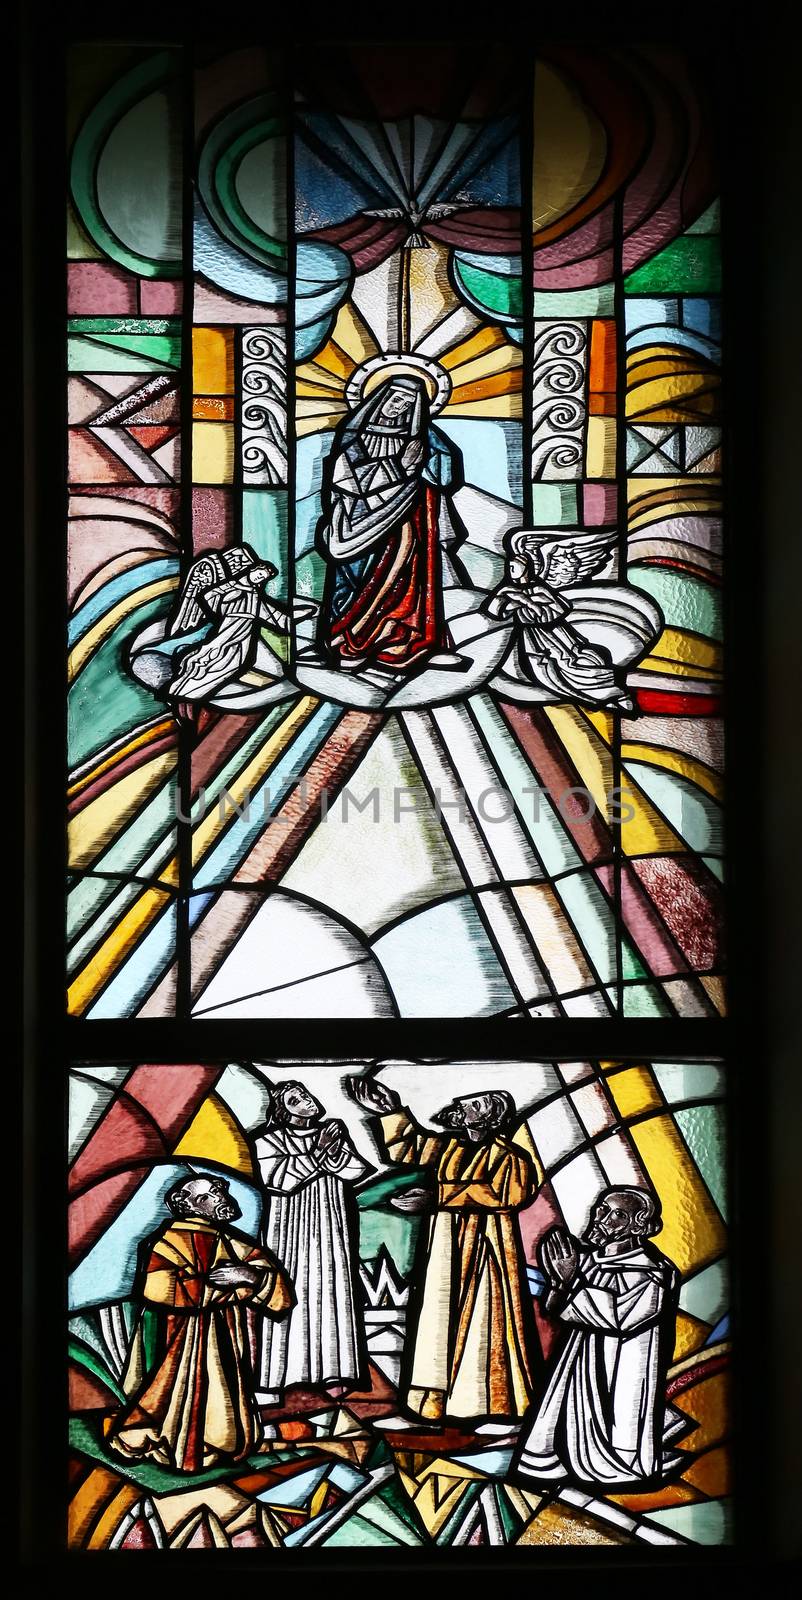 Assumption of the Virgin Mary, stained glass window in Parish church of the St. George in Durmanec, Zagorje region, Croatia